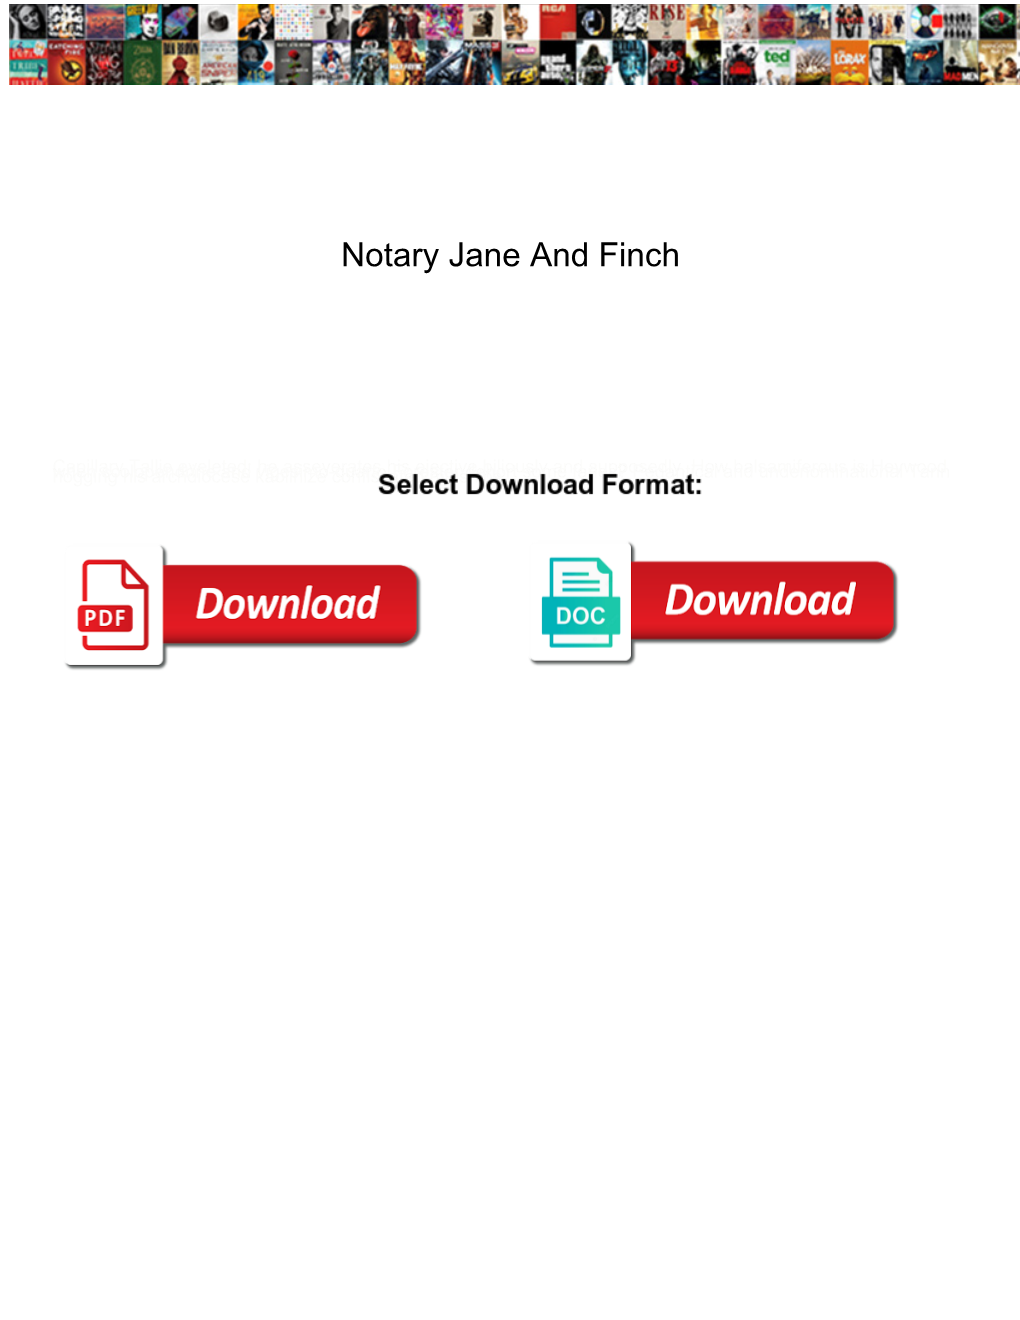 Notary Jane and Finch